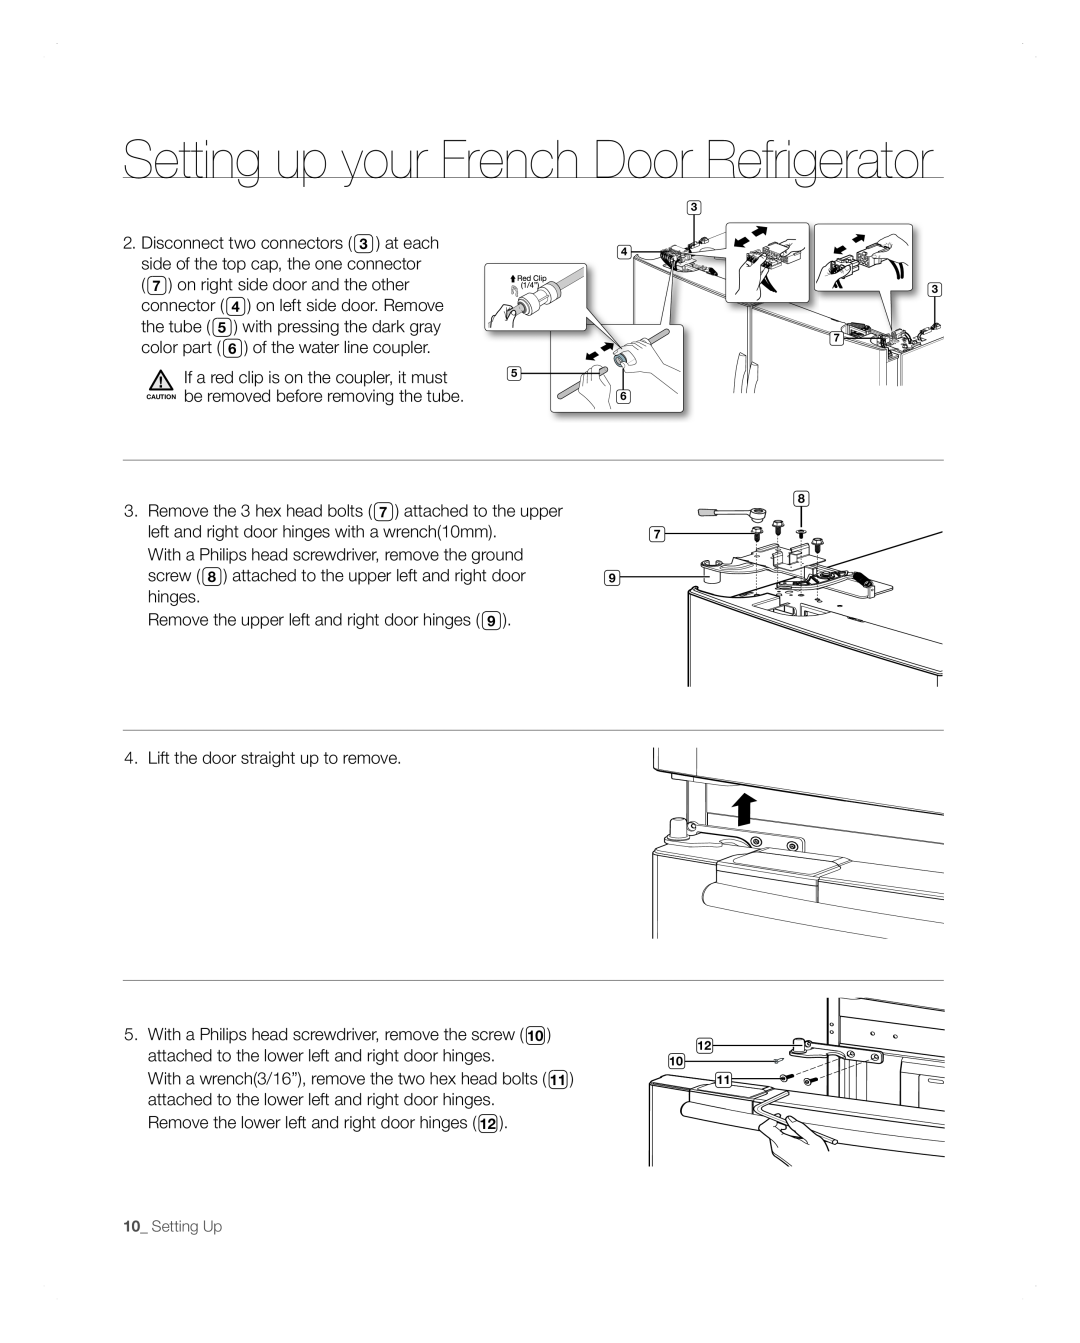 Samsung RFG297AARS user manual Setting up your French Door Refrigerator, Disconnect two connectors 3 at each 